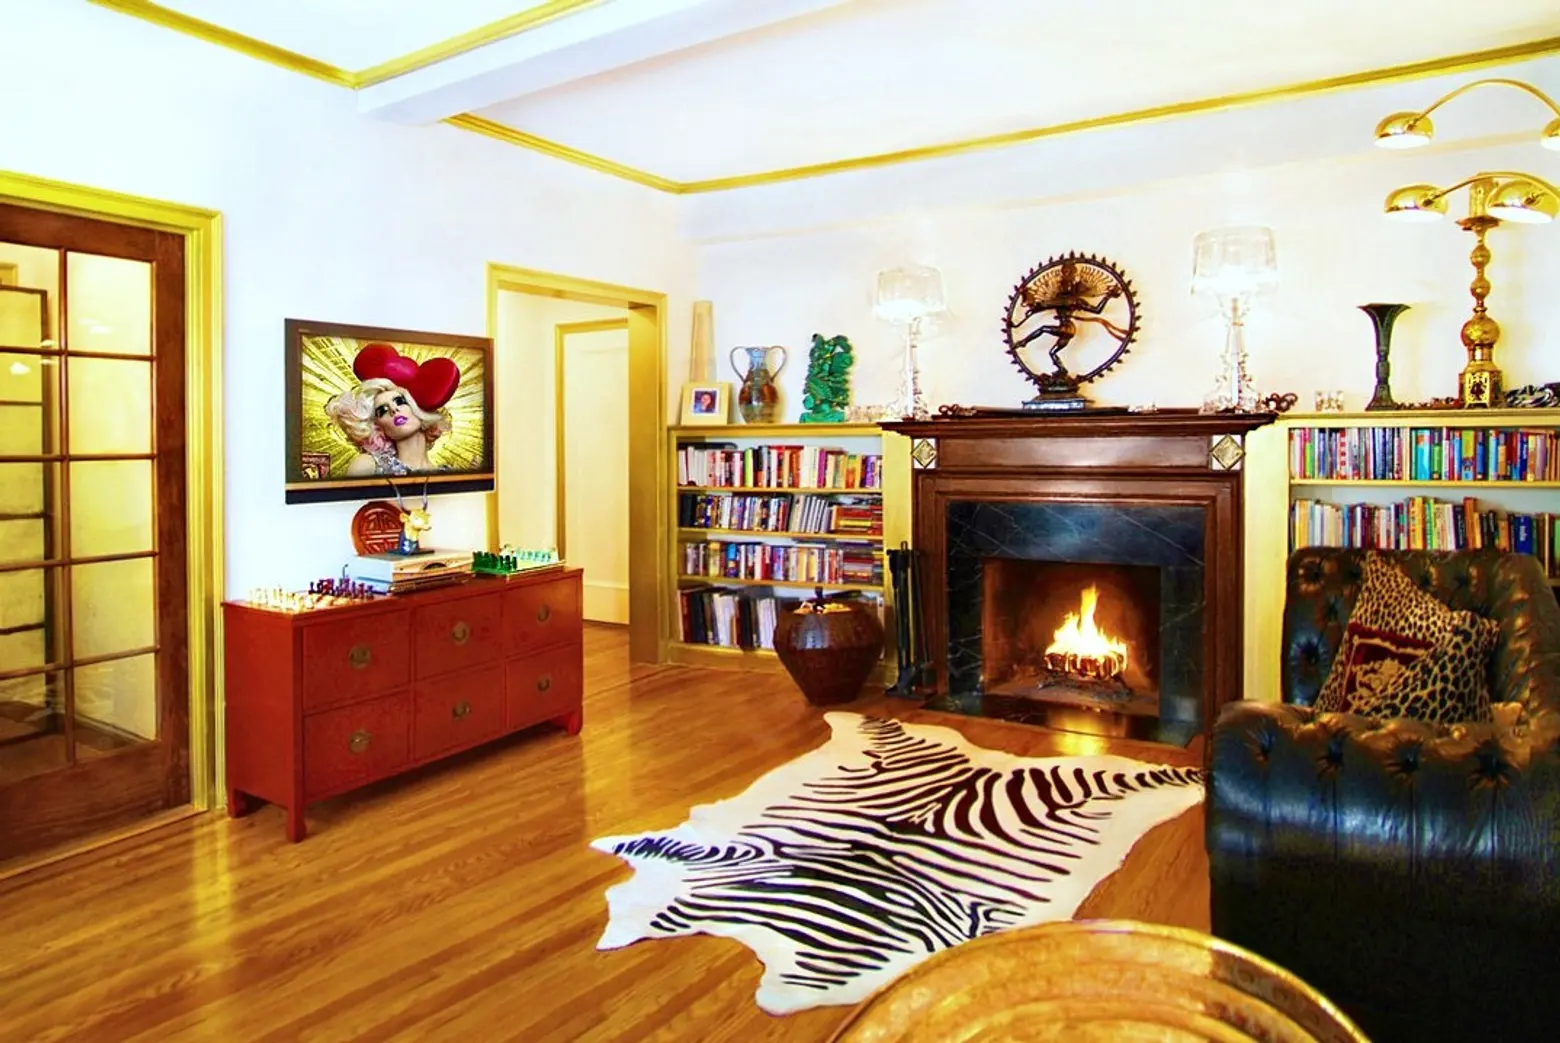 Bright Art Deco One-Bedroom in Gramercy Park Is for Sale by Owner, Asking $1.2 Million